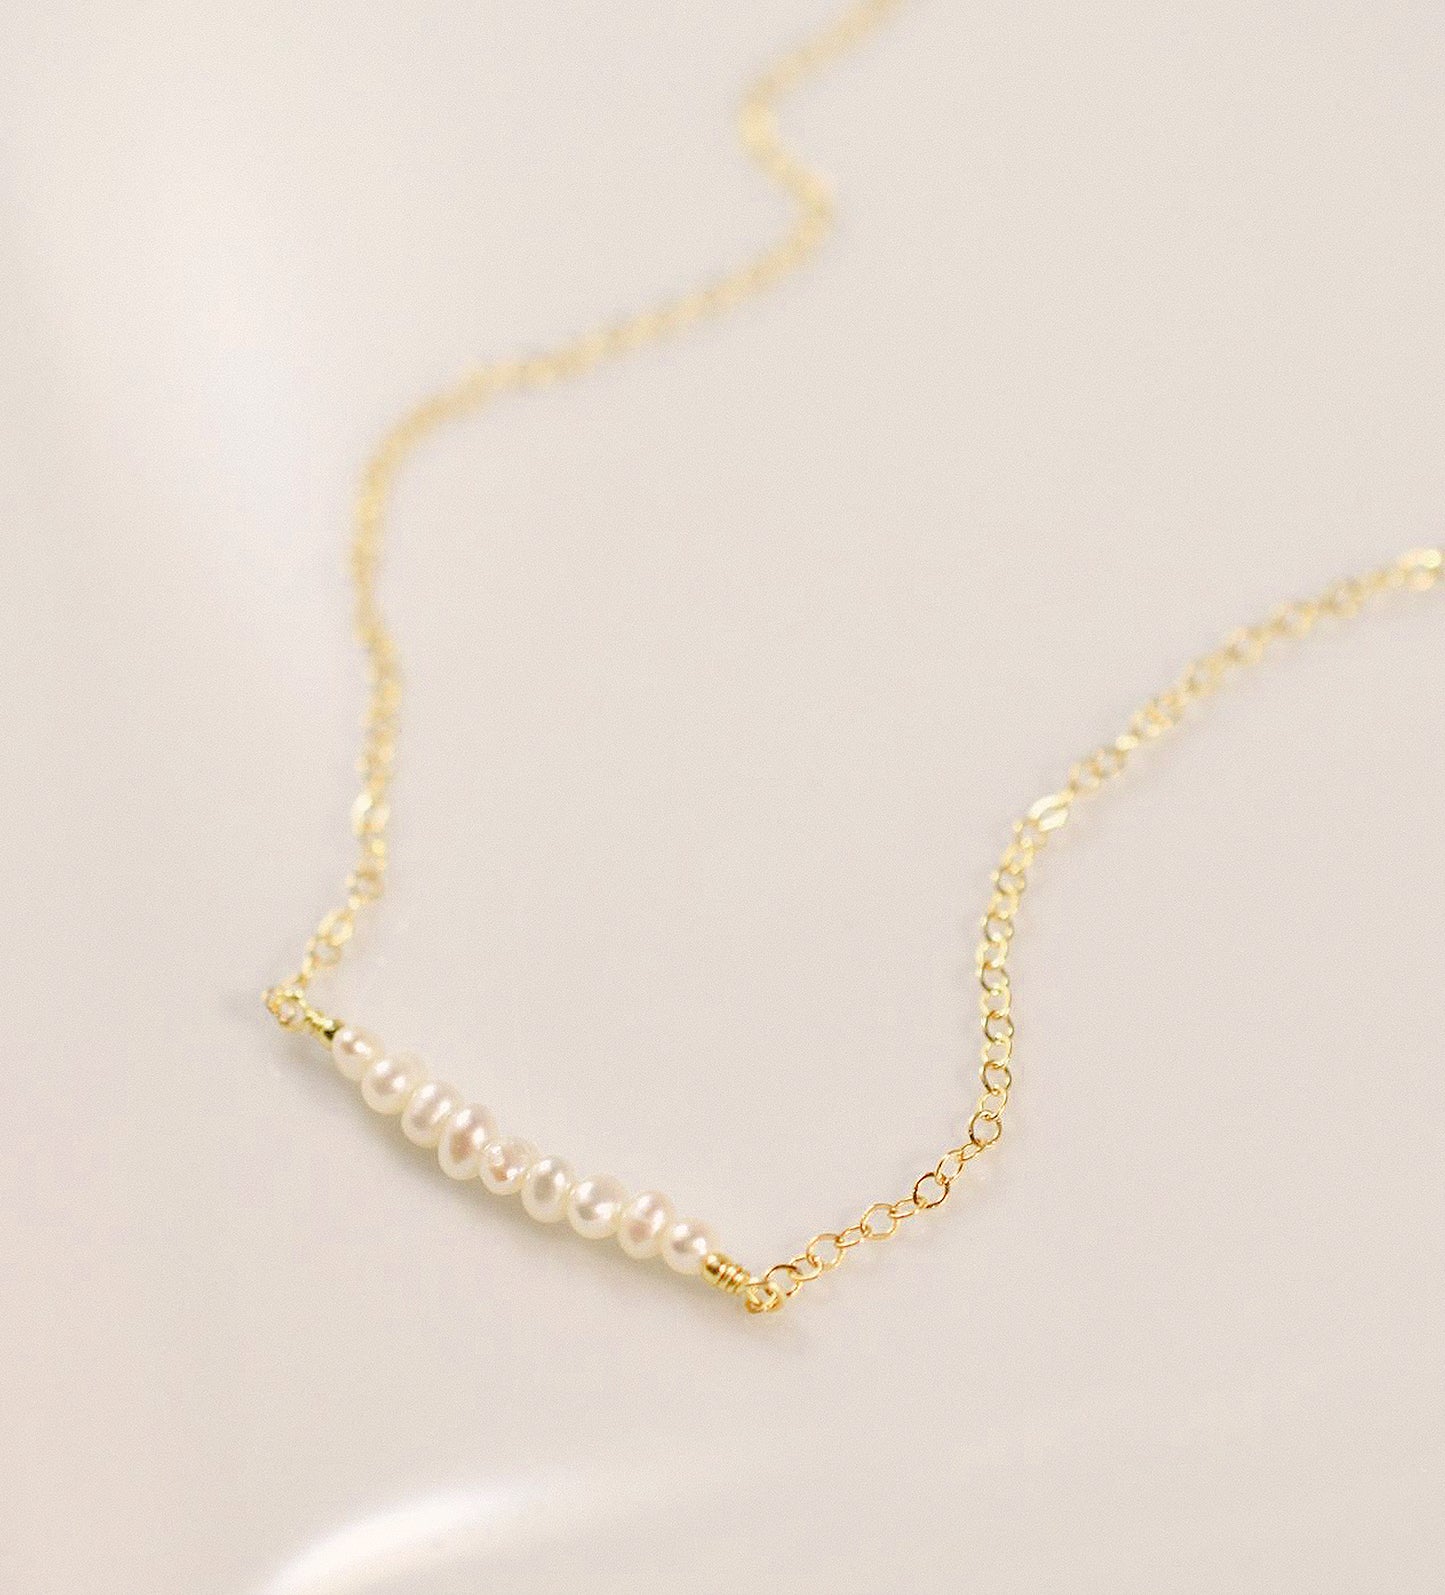 White freshwater pearl bar necklace shown in 14k gold filled. The peals are small and slightly irregular in shape.